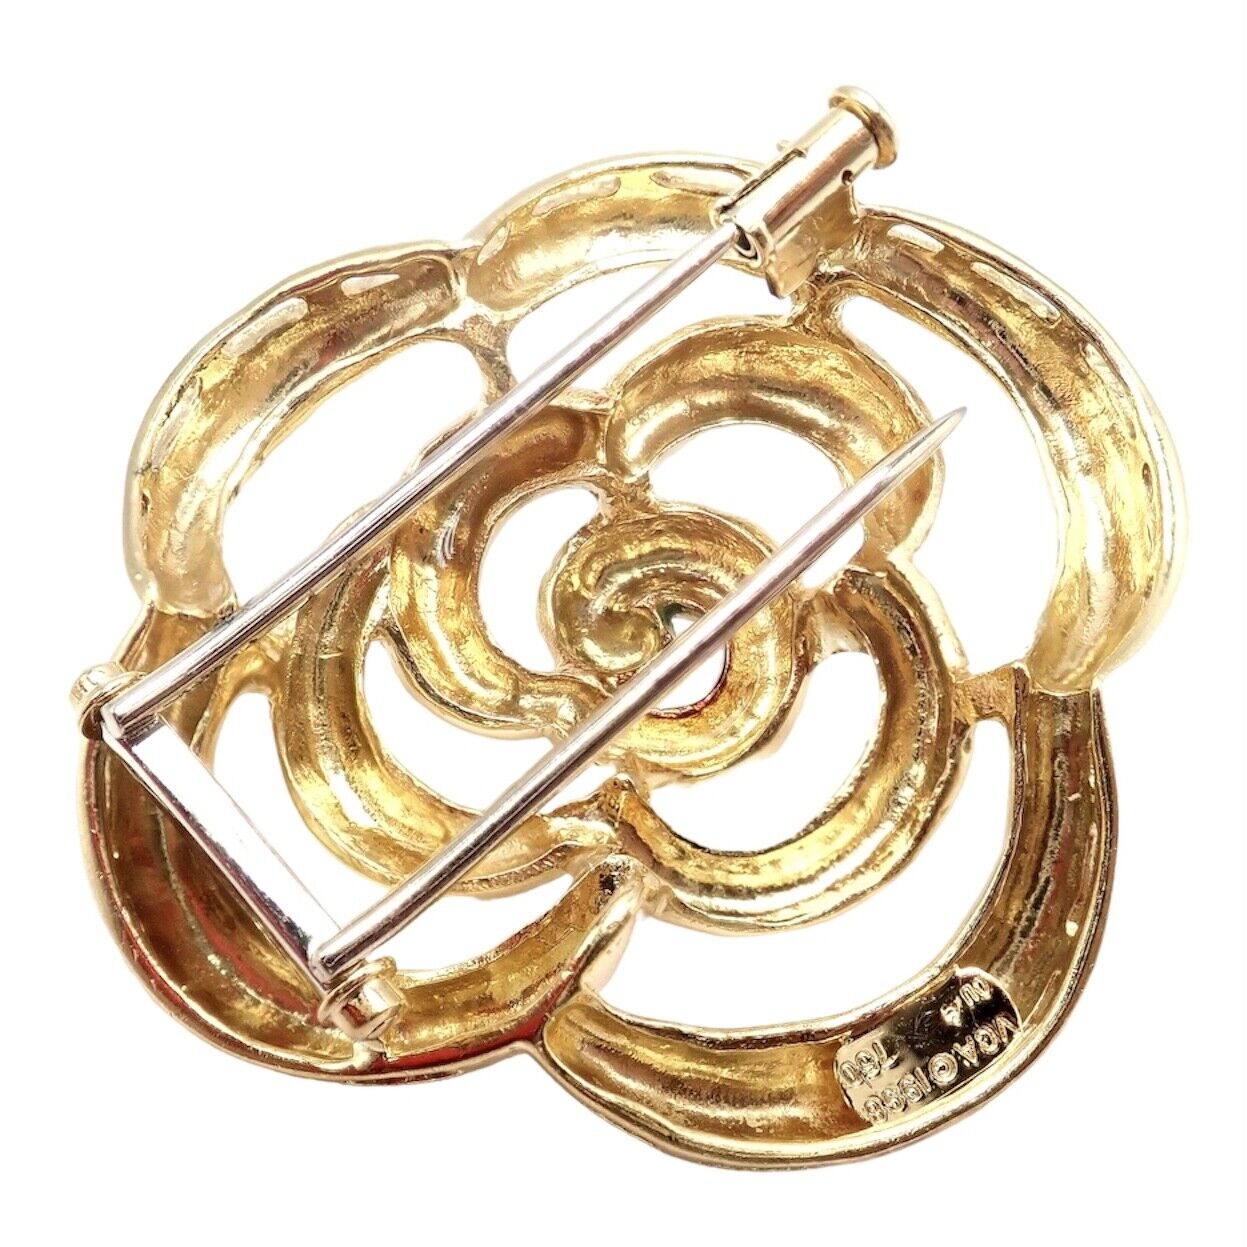 Van Cleef & Arpels Jewelry & Watches:Fine Jewelry:Brooches & Pins Authentic Van Cleef & Arpels 18k Yellow Gold Camellia Flower Pin Brooch 1998